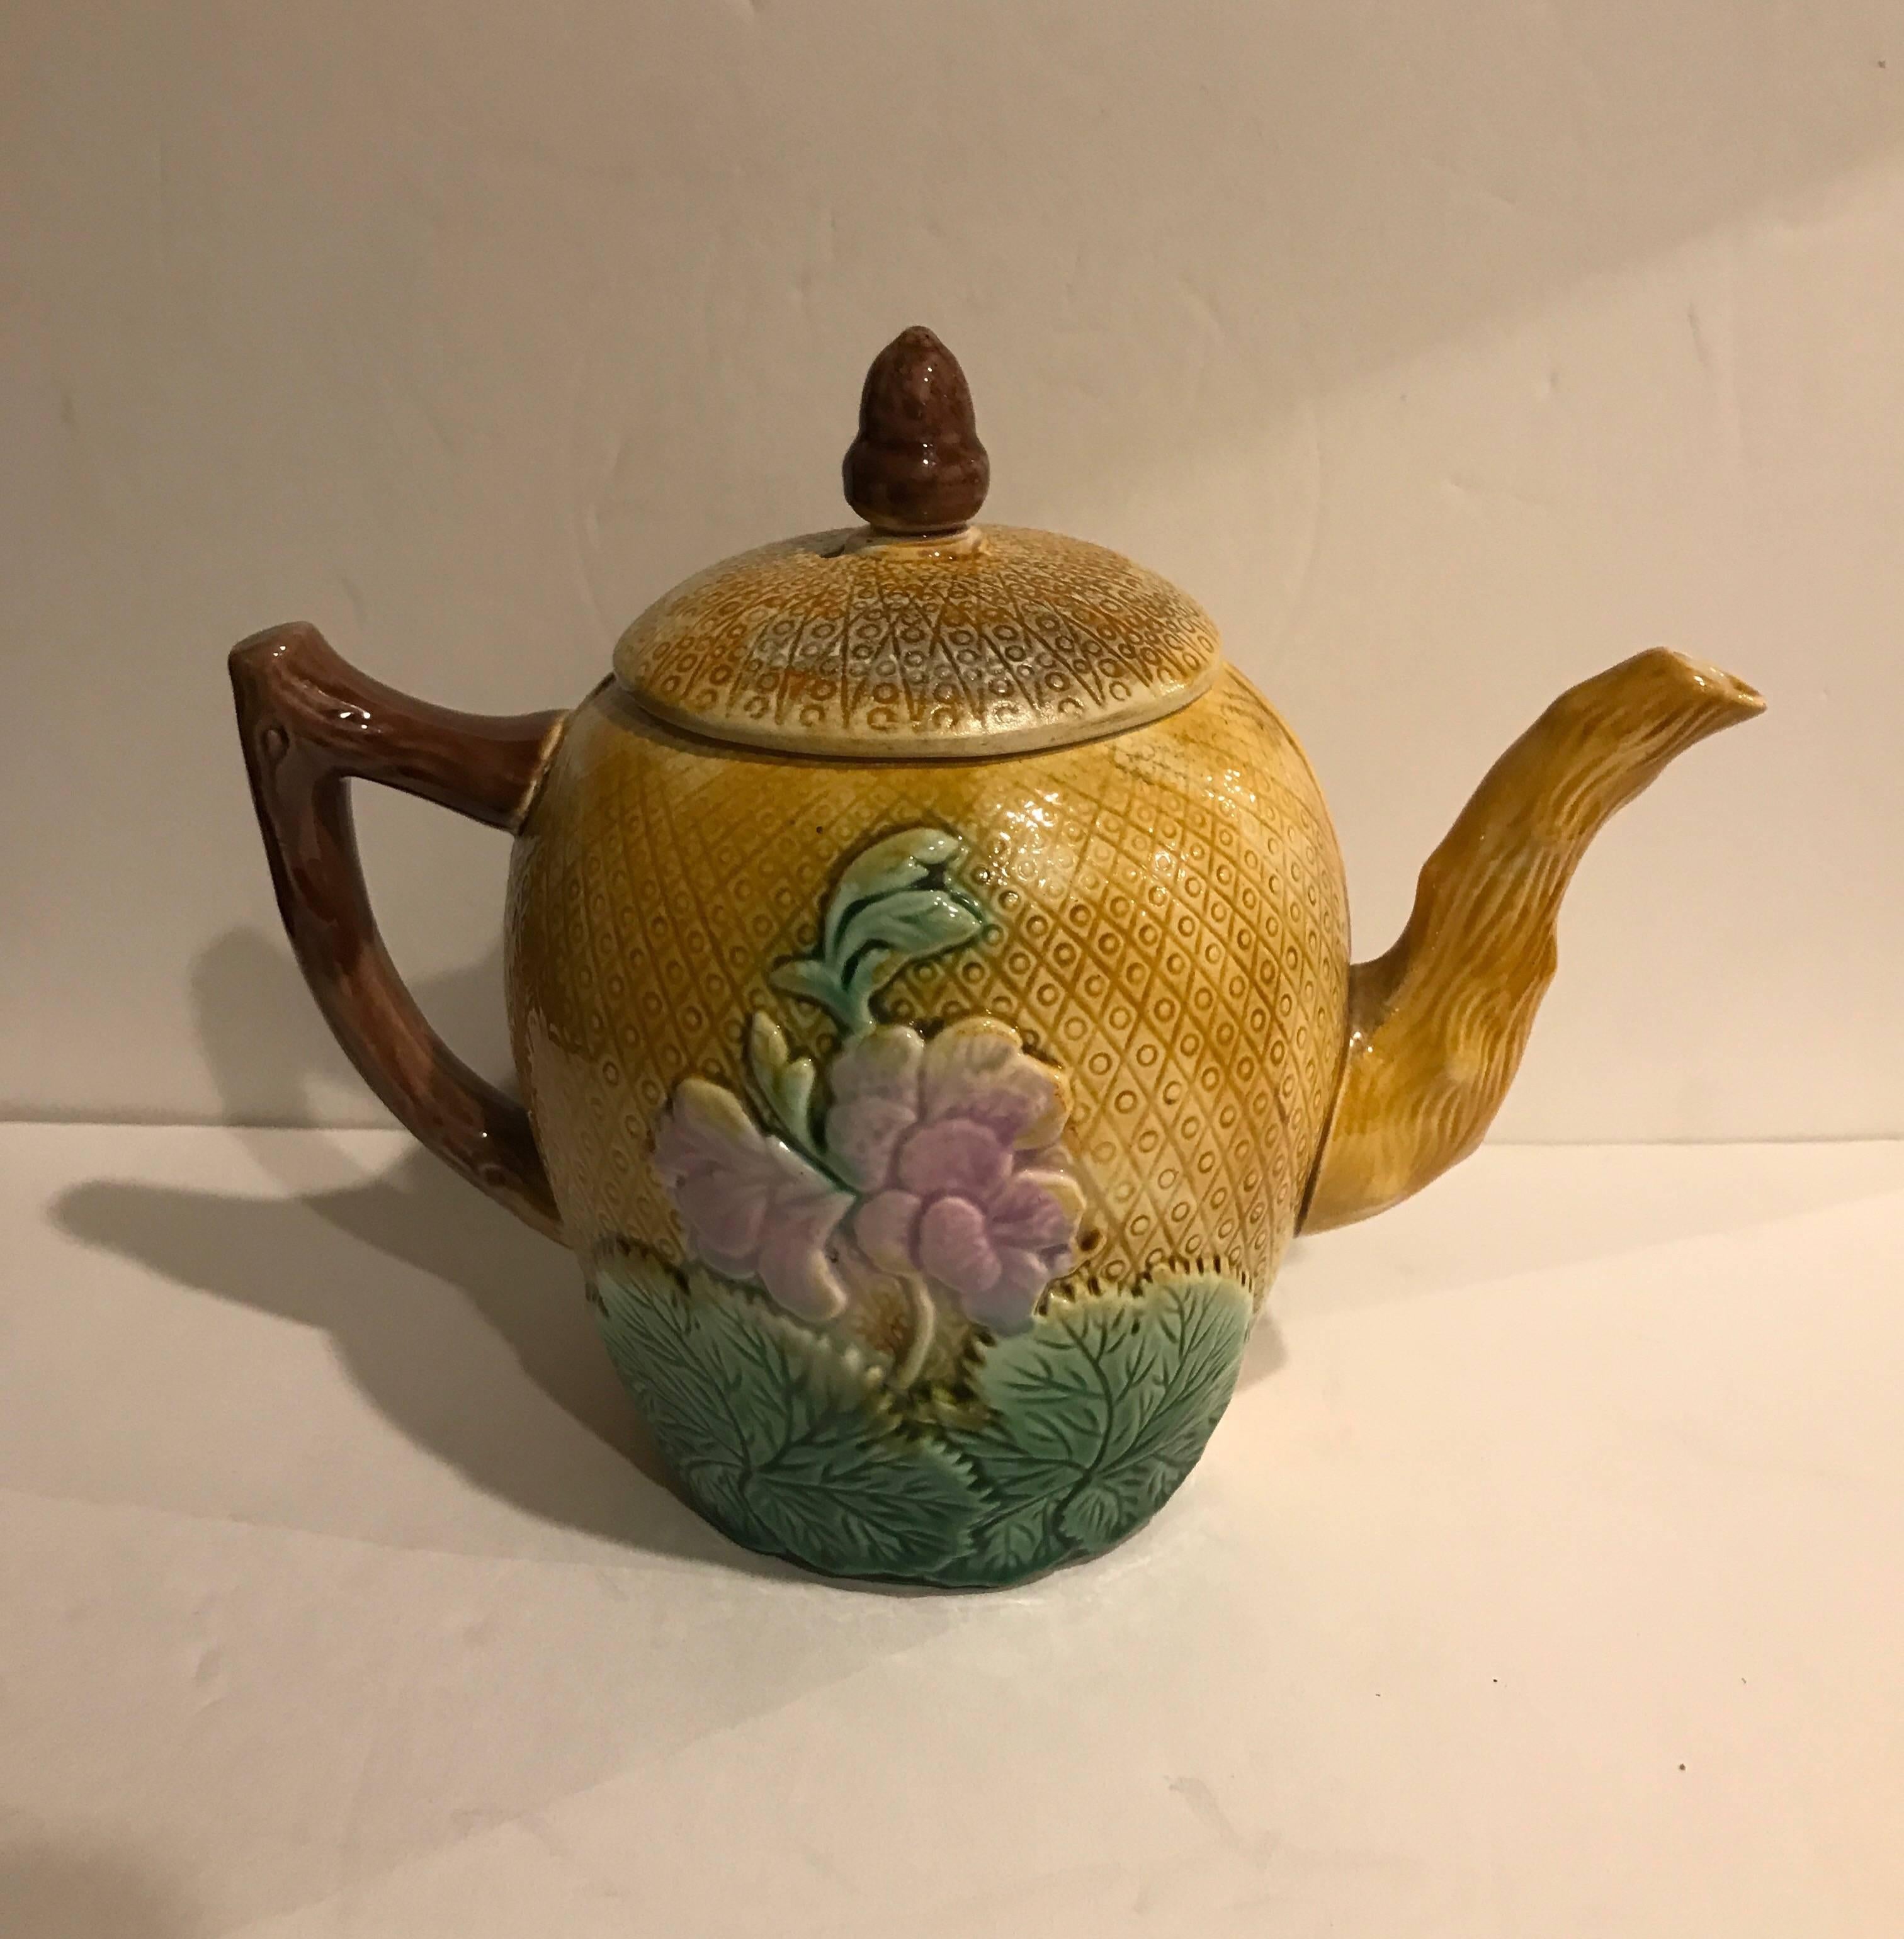 Vibrant and whimsical late 19th century Majolica teapot with yellow background. The geranium decoration on the front and back with acorn finial.